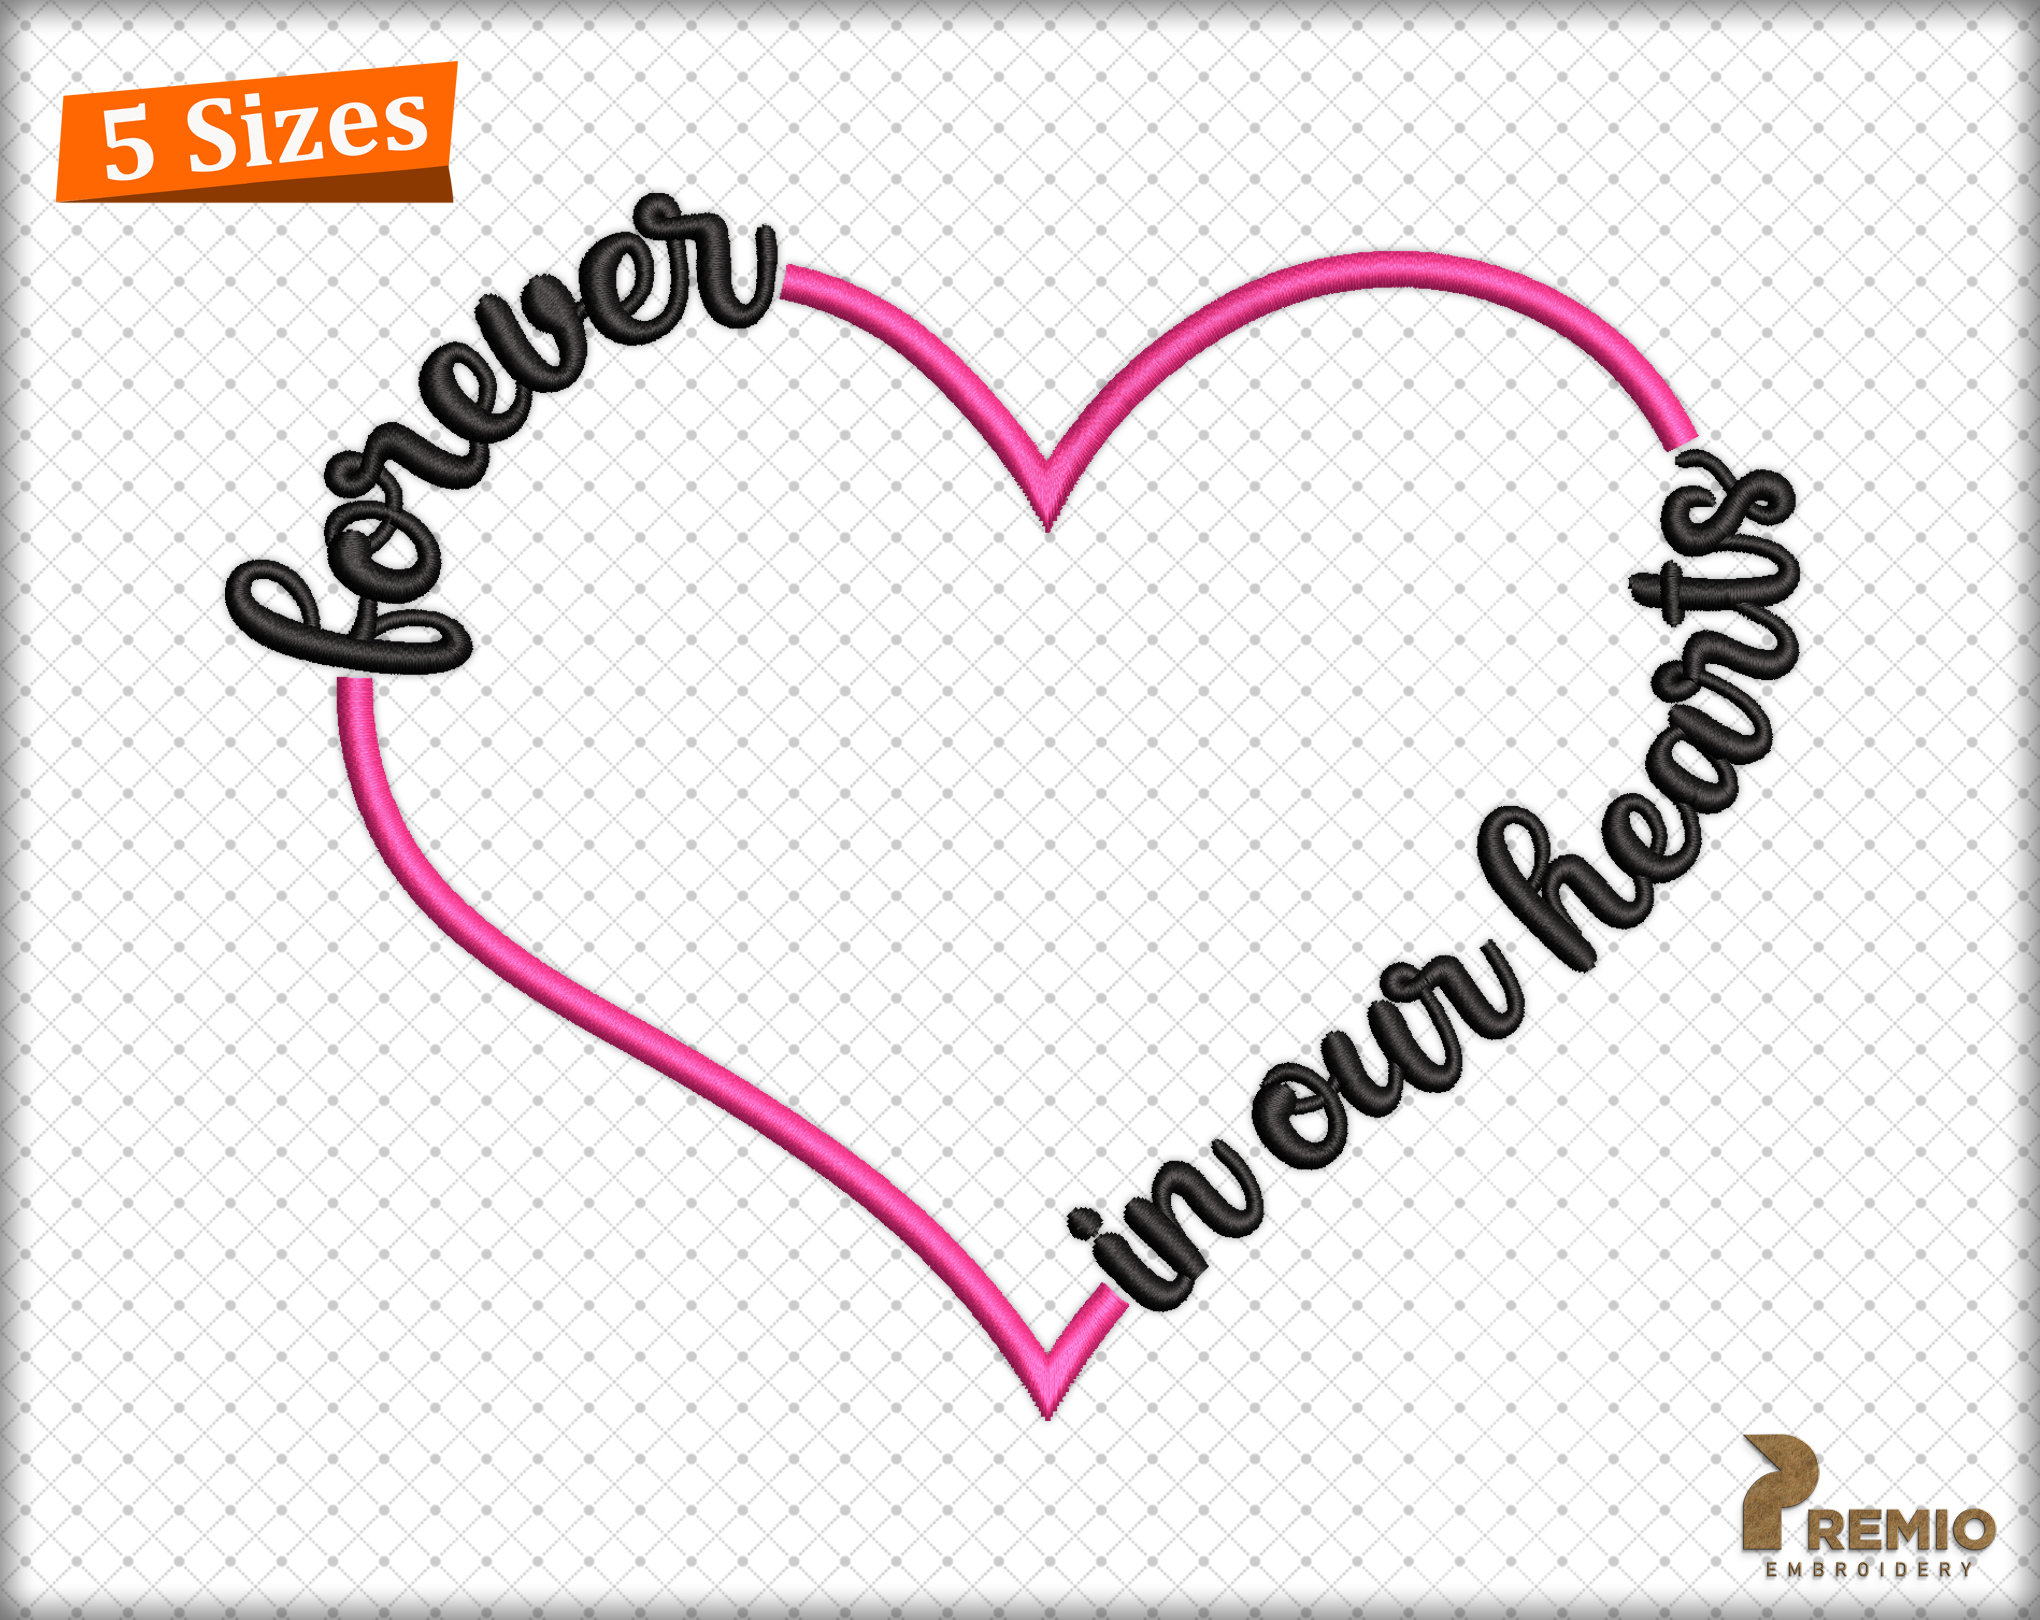 Endearing designs machine Embroidery design as an instant download by Sue Box Powder Box in a Heart Shape